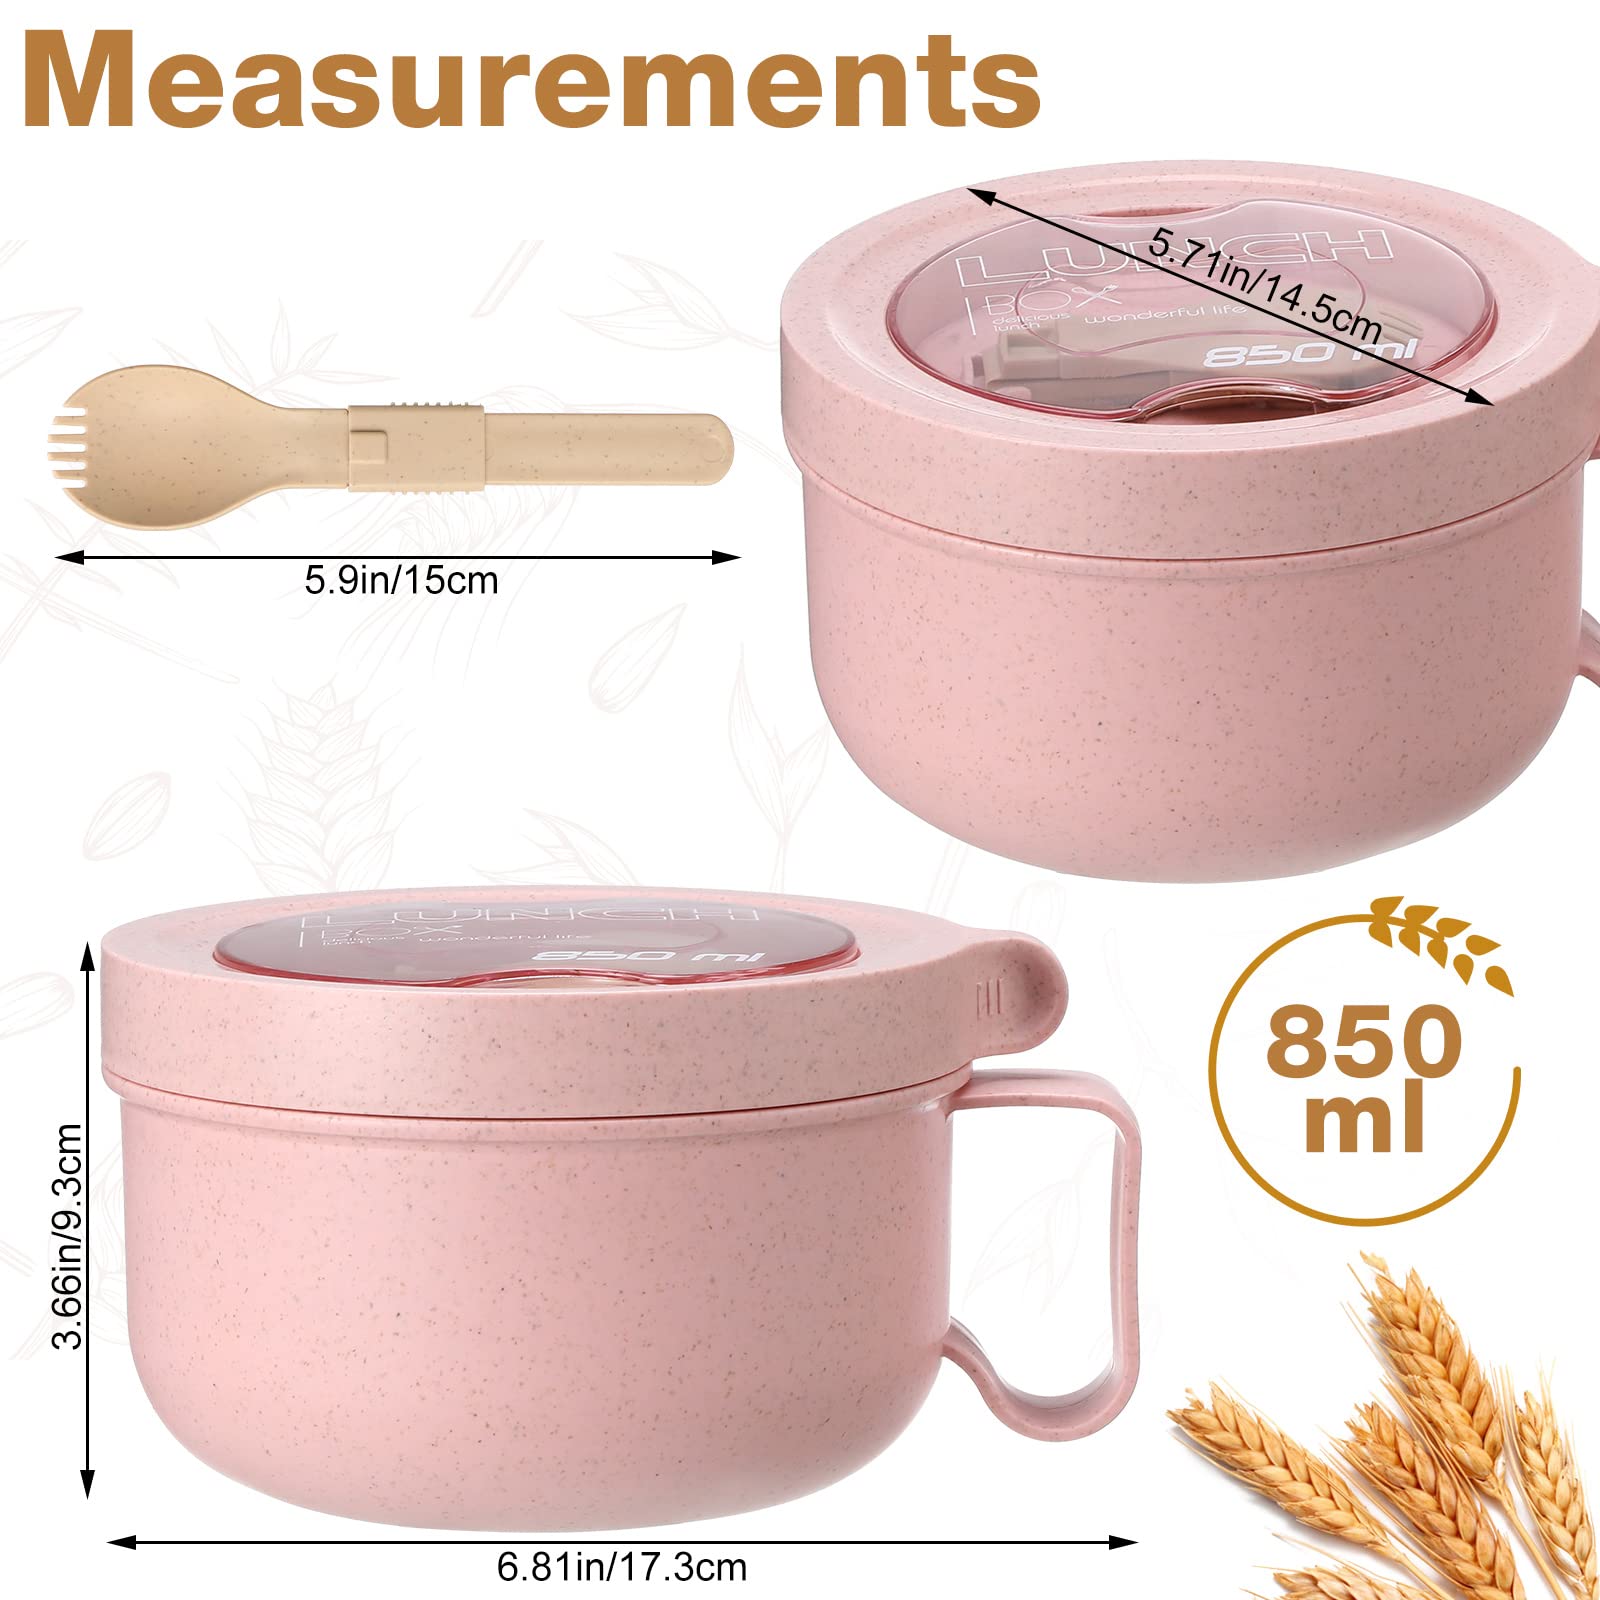 3 Pcs Wheat Straw Soup Bowls with Spork Large Soup Mugs with Lids Instant Ramen Noodles Bowl Soup Cup with Handle Instant Cooking Bowls for Travel Food Containers, Beige, Pink, Green, 28.74 oz